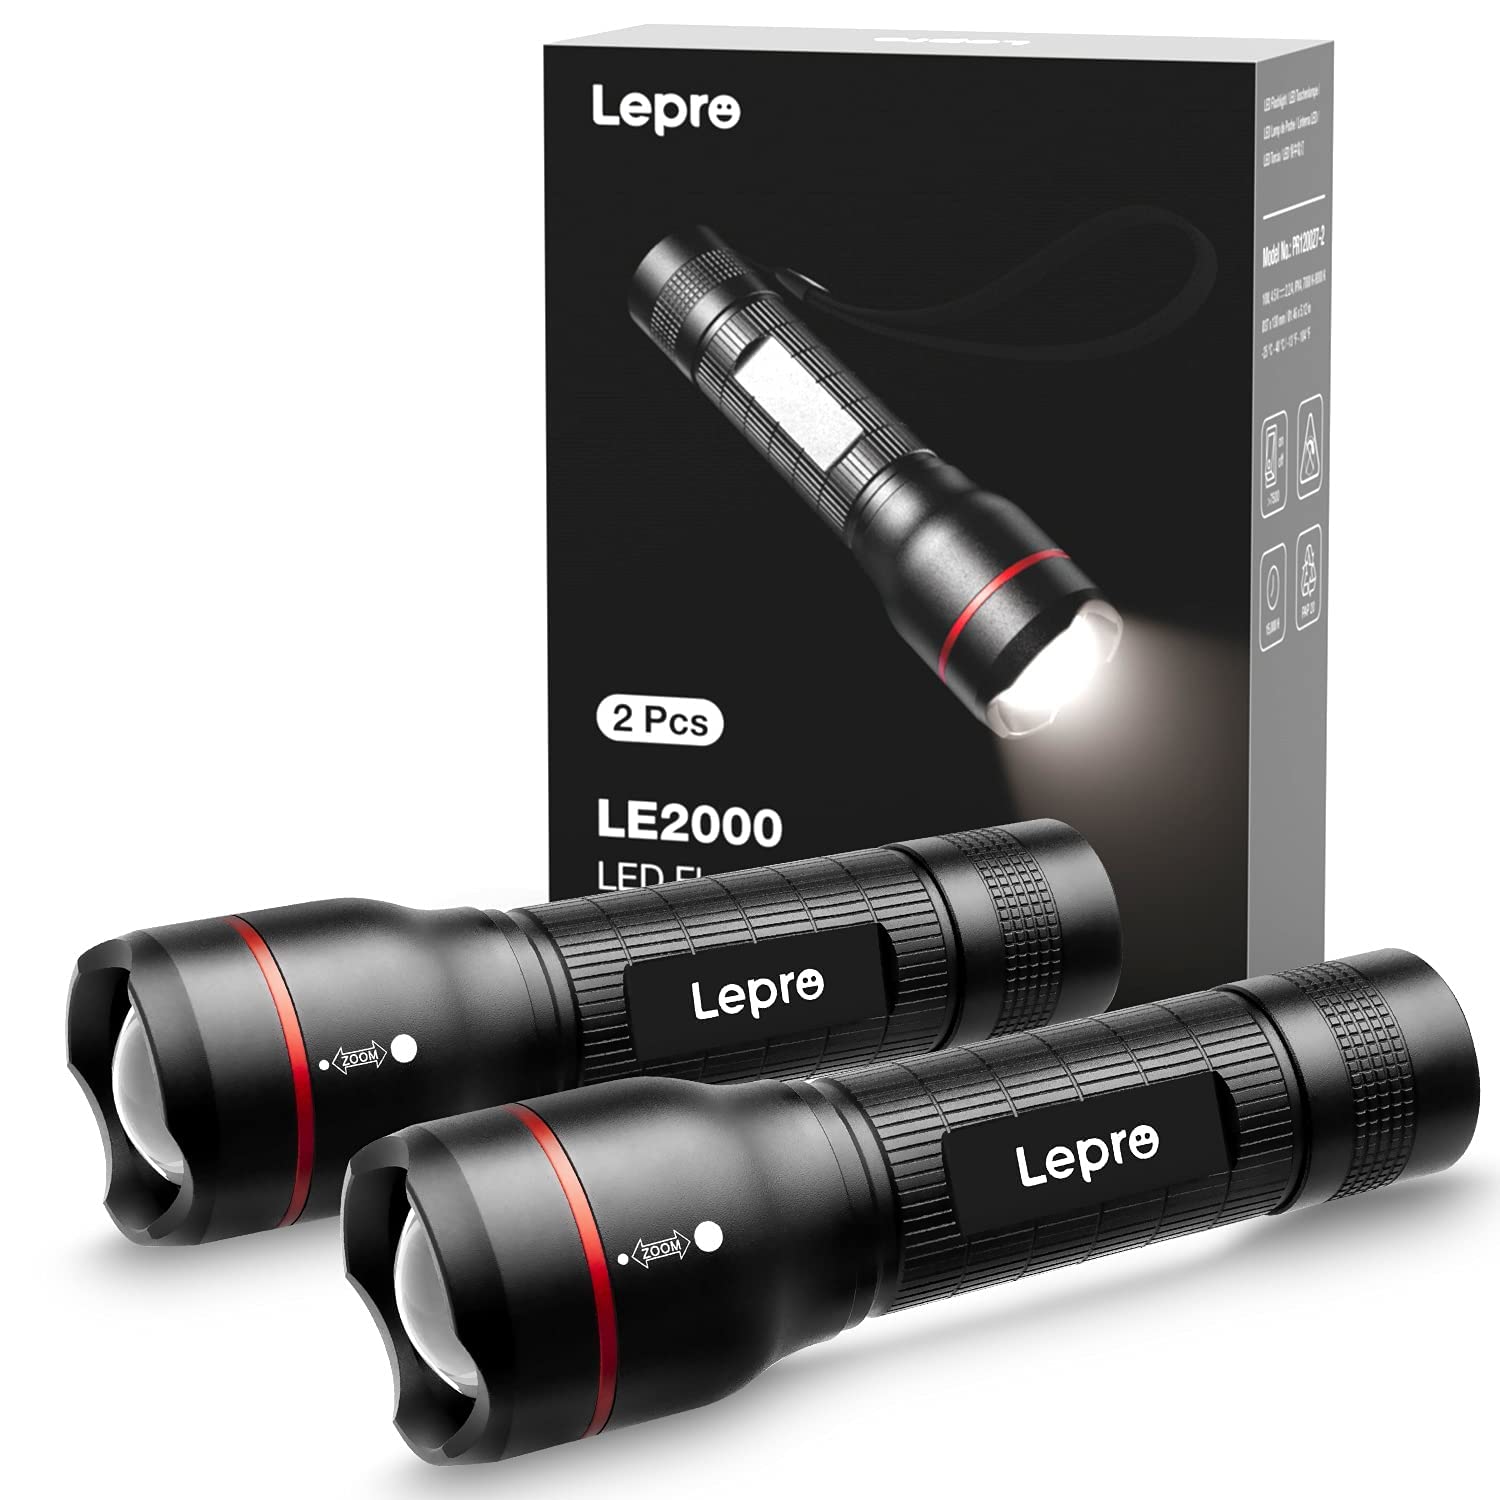 Lepro LED Torch, [2 Pack] LE2000 Torch, Super Bright, 5 Modes, Zoomable, Water Resistant, Pocket Size & Lightweight, AAA Battery Operated, Two Battery Options, for Outdoor Use & Indoor Emergency Use